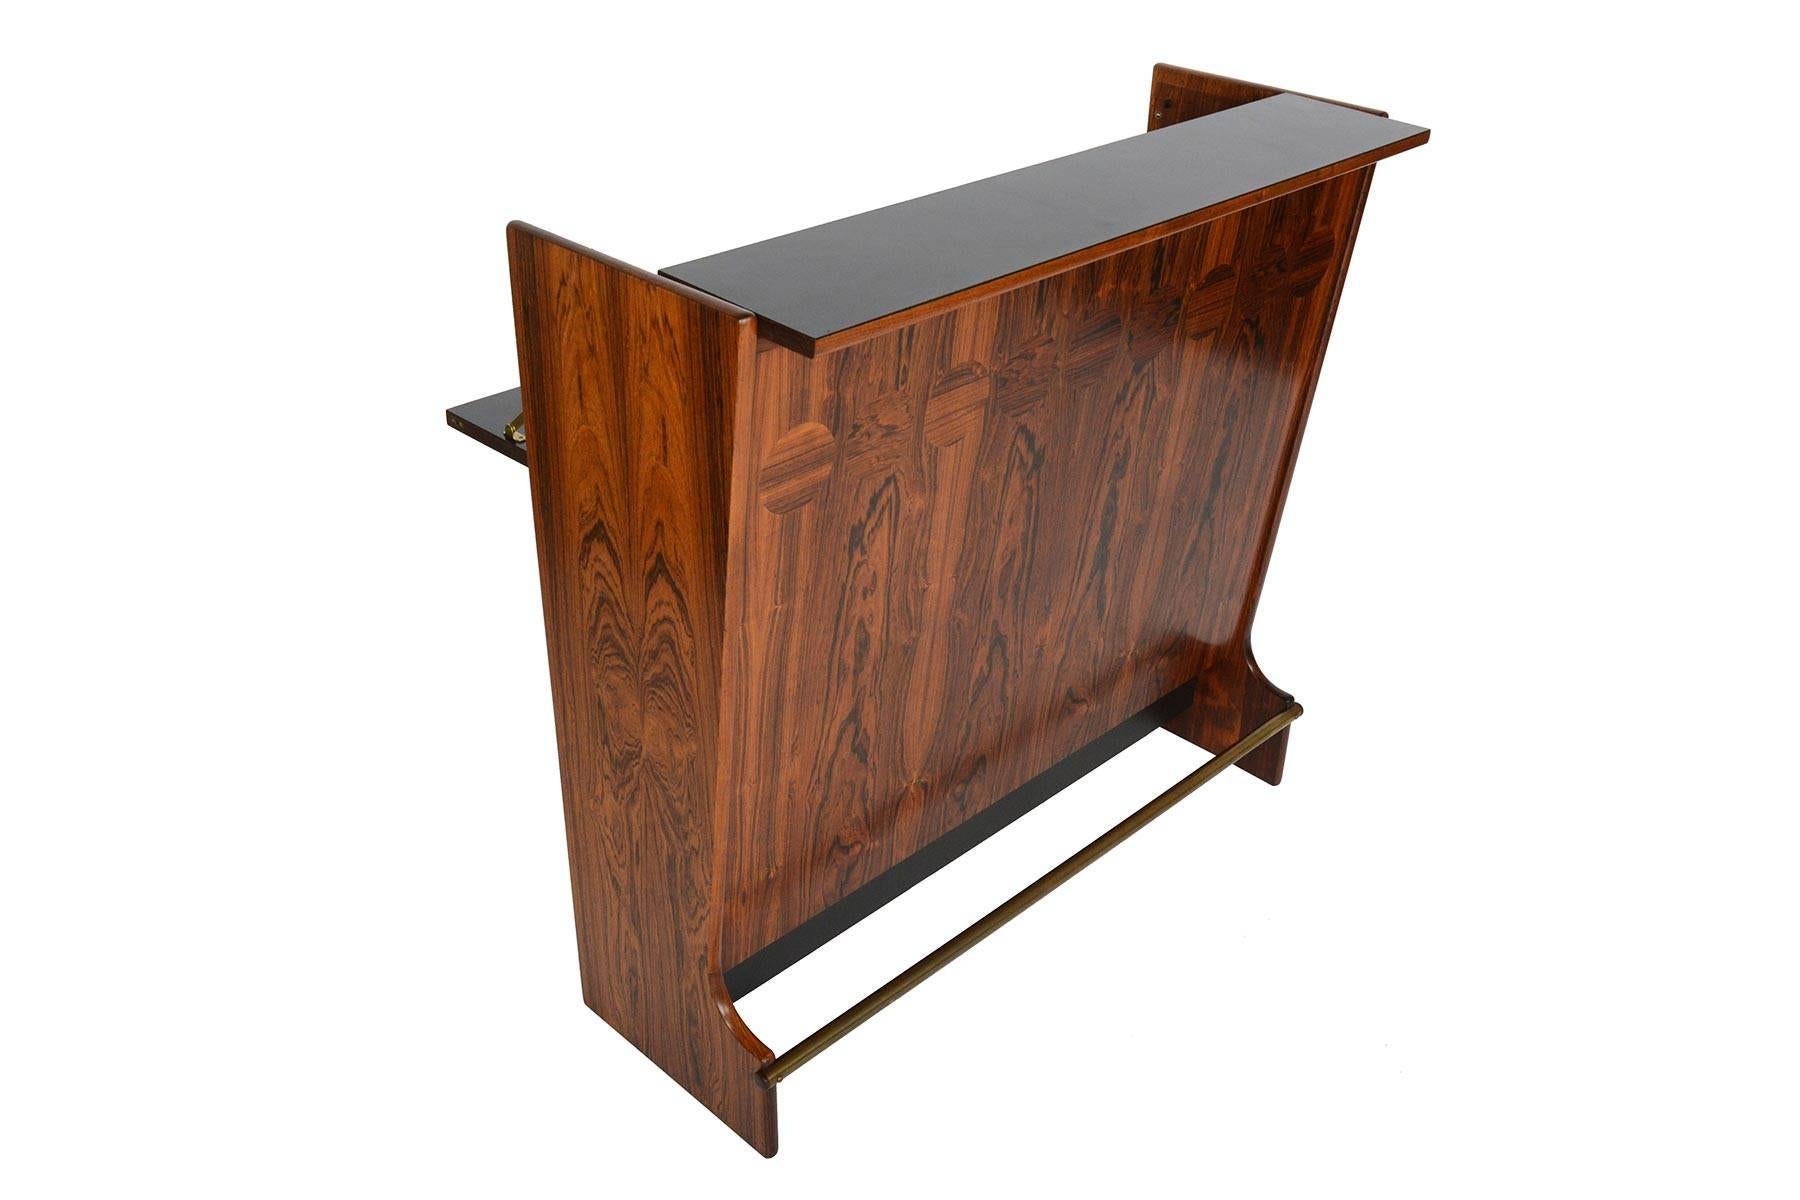 This top of the line Danish modern Brazilian rosewood freestanding cocktail bar Model SK 661 was designed by Johannes Andersen for J. Skaaning & Søn in 1958. With absolutely stunning grain and detail throughout, this rare piece features reverse